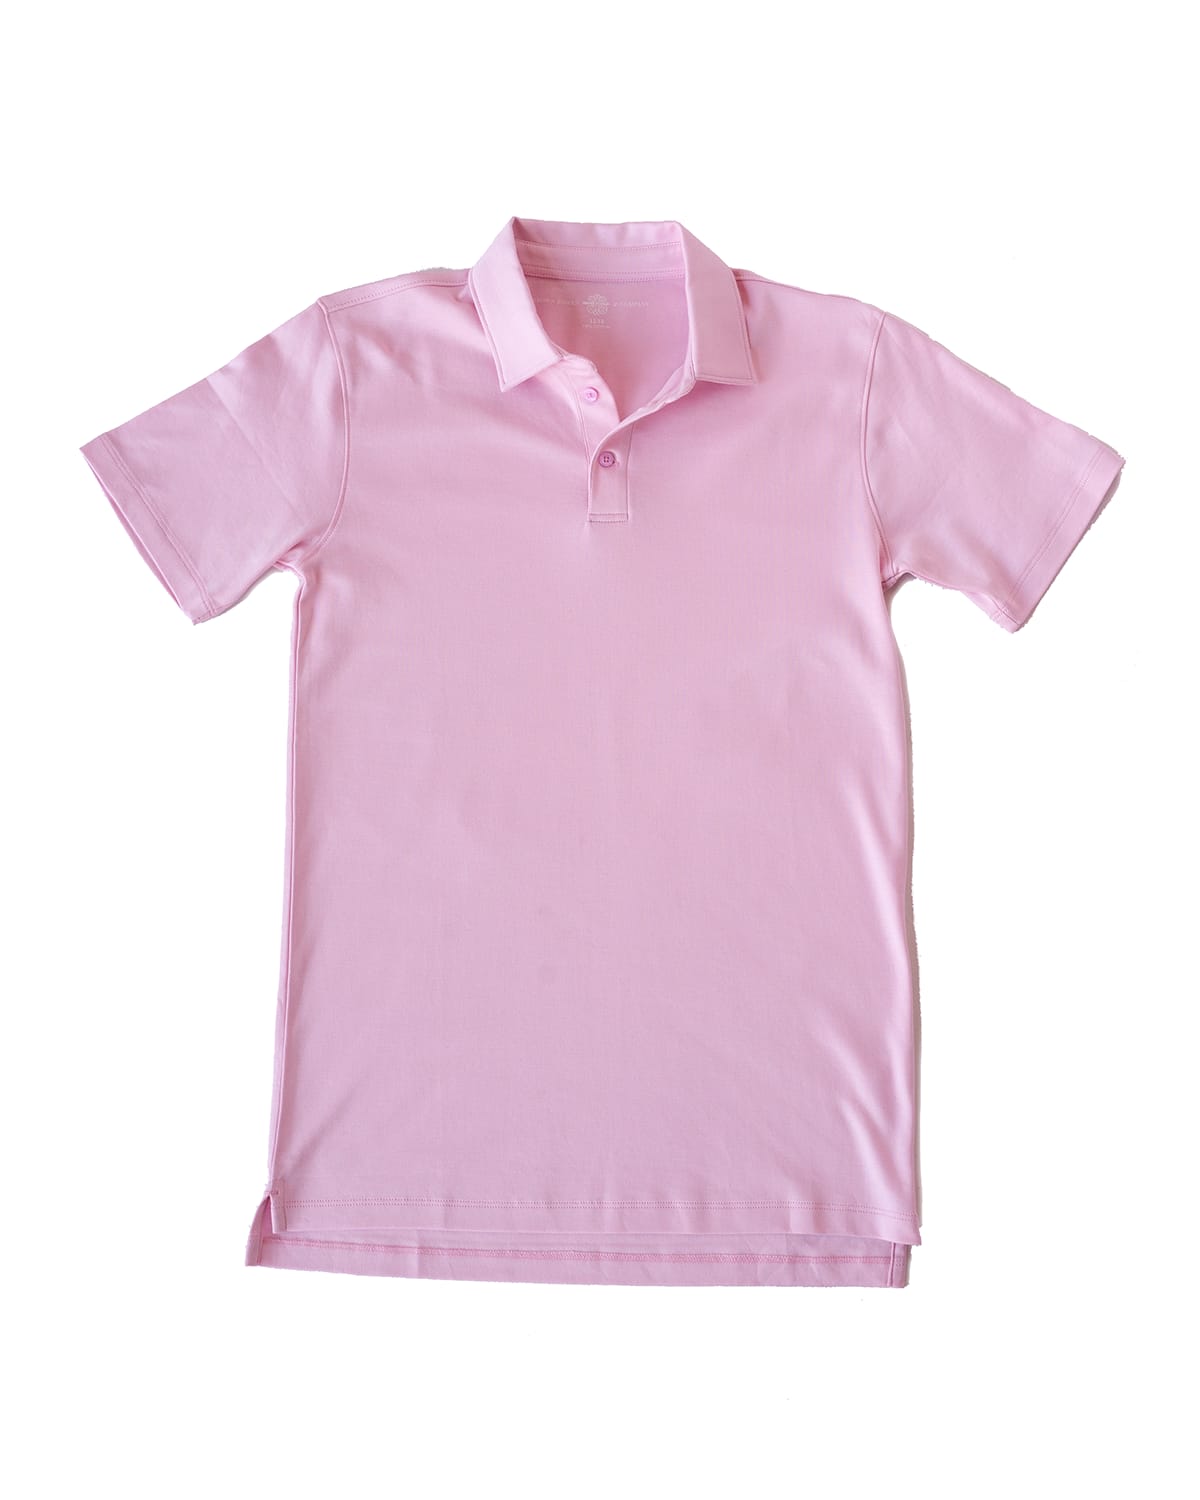 Shop Brown Bowen And Company Planters Inn Polo - Monogram Option In Pink